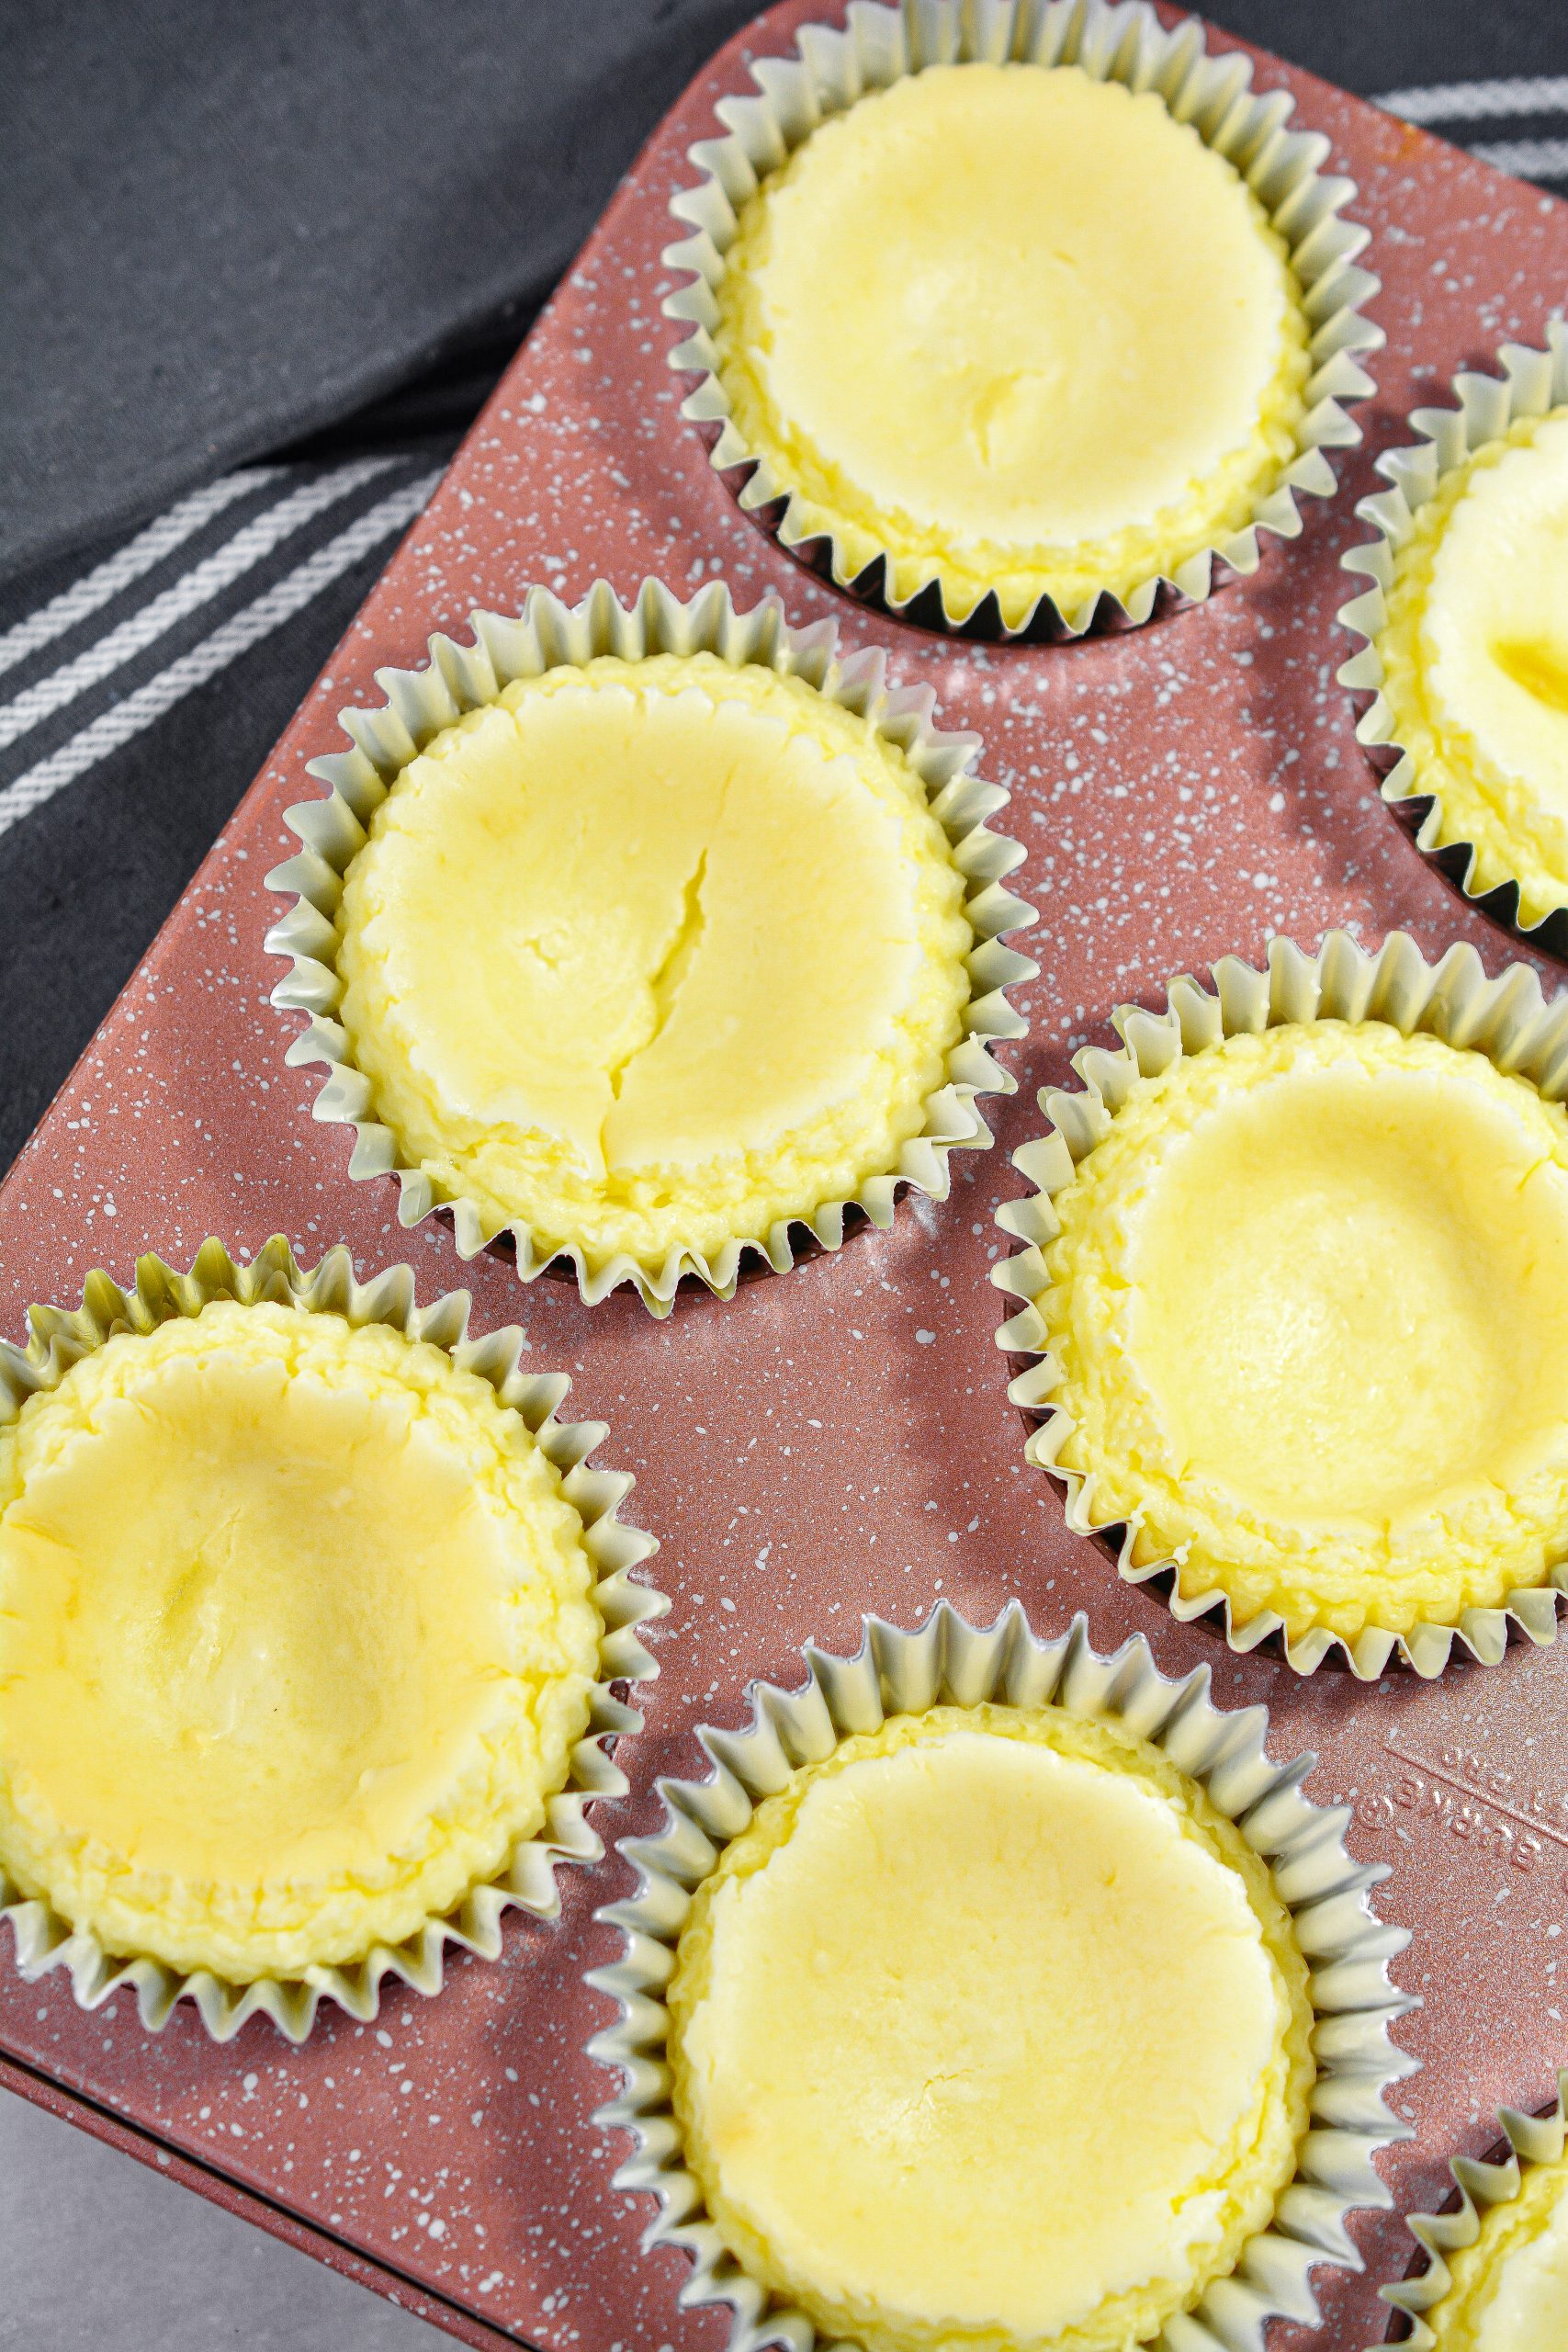 Let cool and then chill the mini cheesecakes for at least an hour.